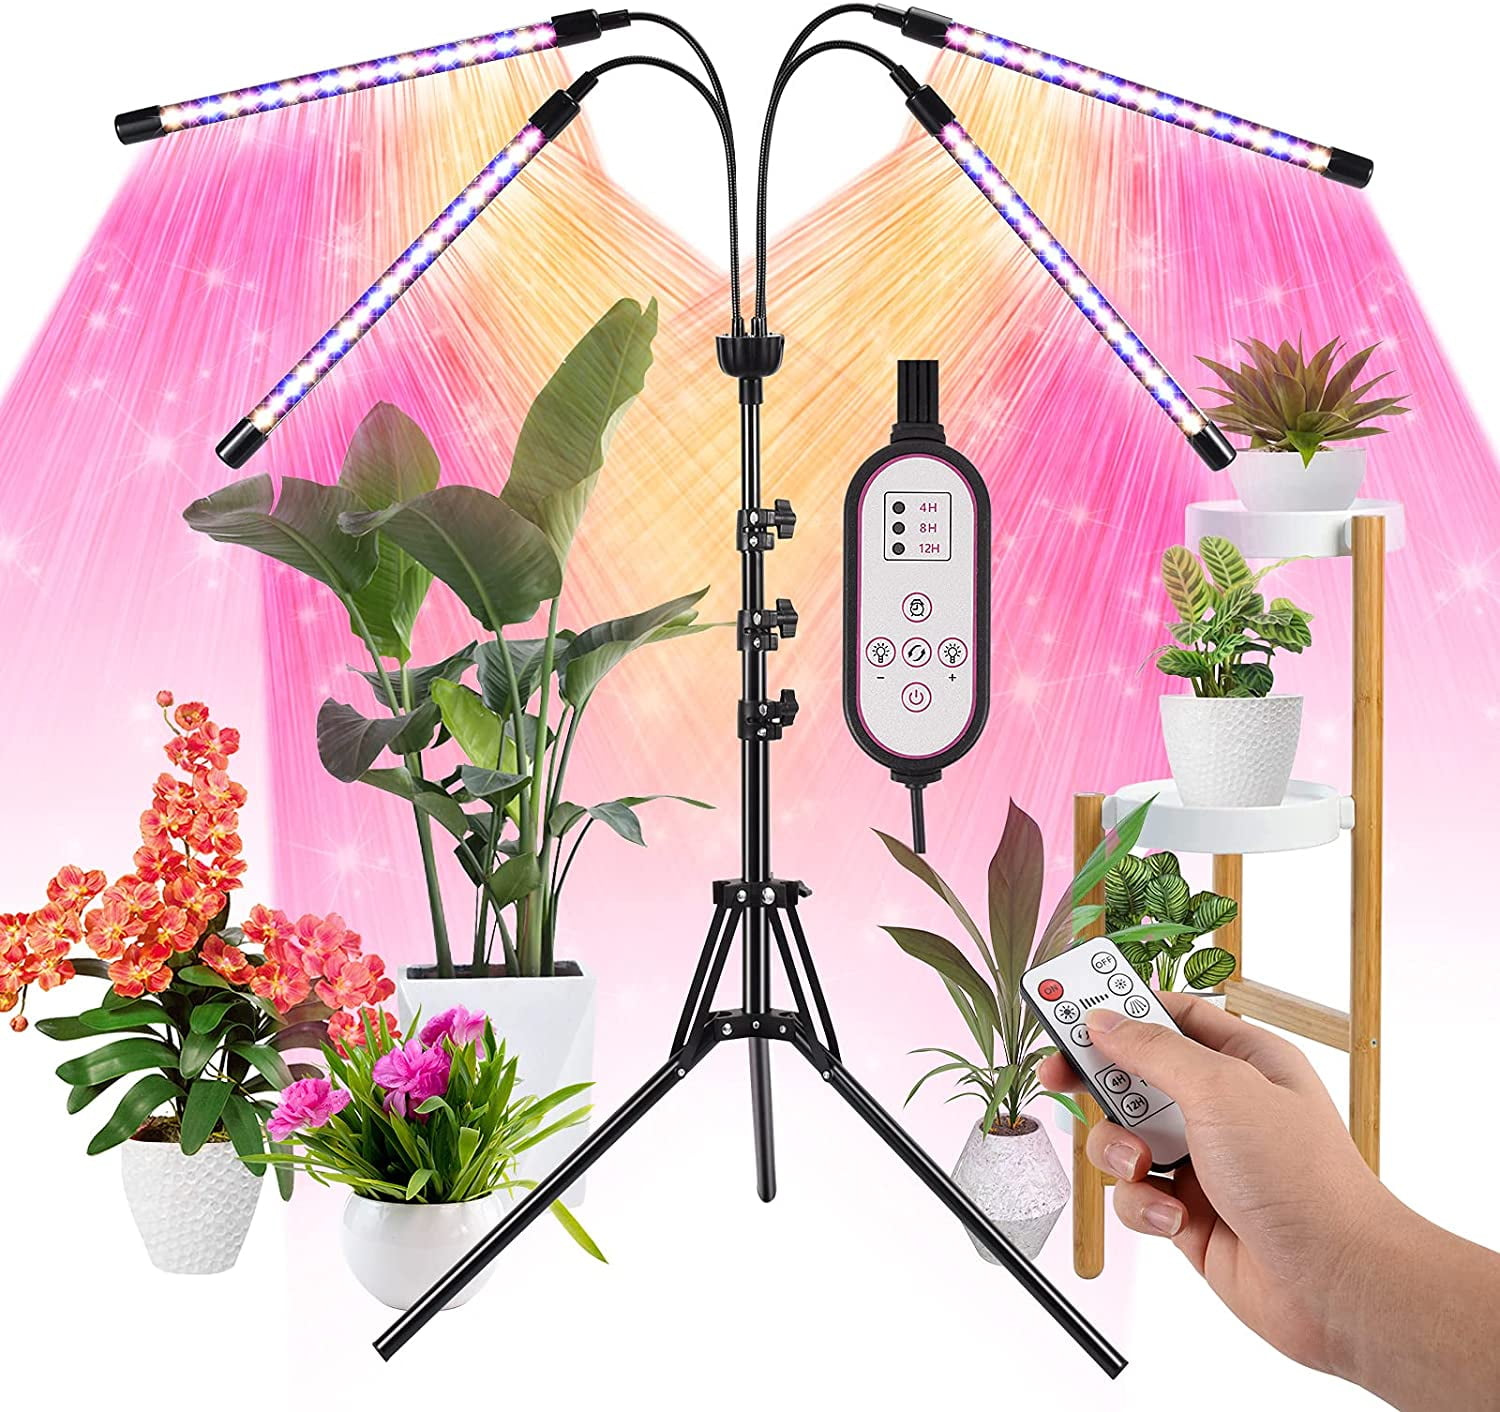 LED Grow Light Plant 4 Head Growing Lamp Lights for Indoor Plants Hydroponics US 